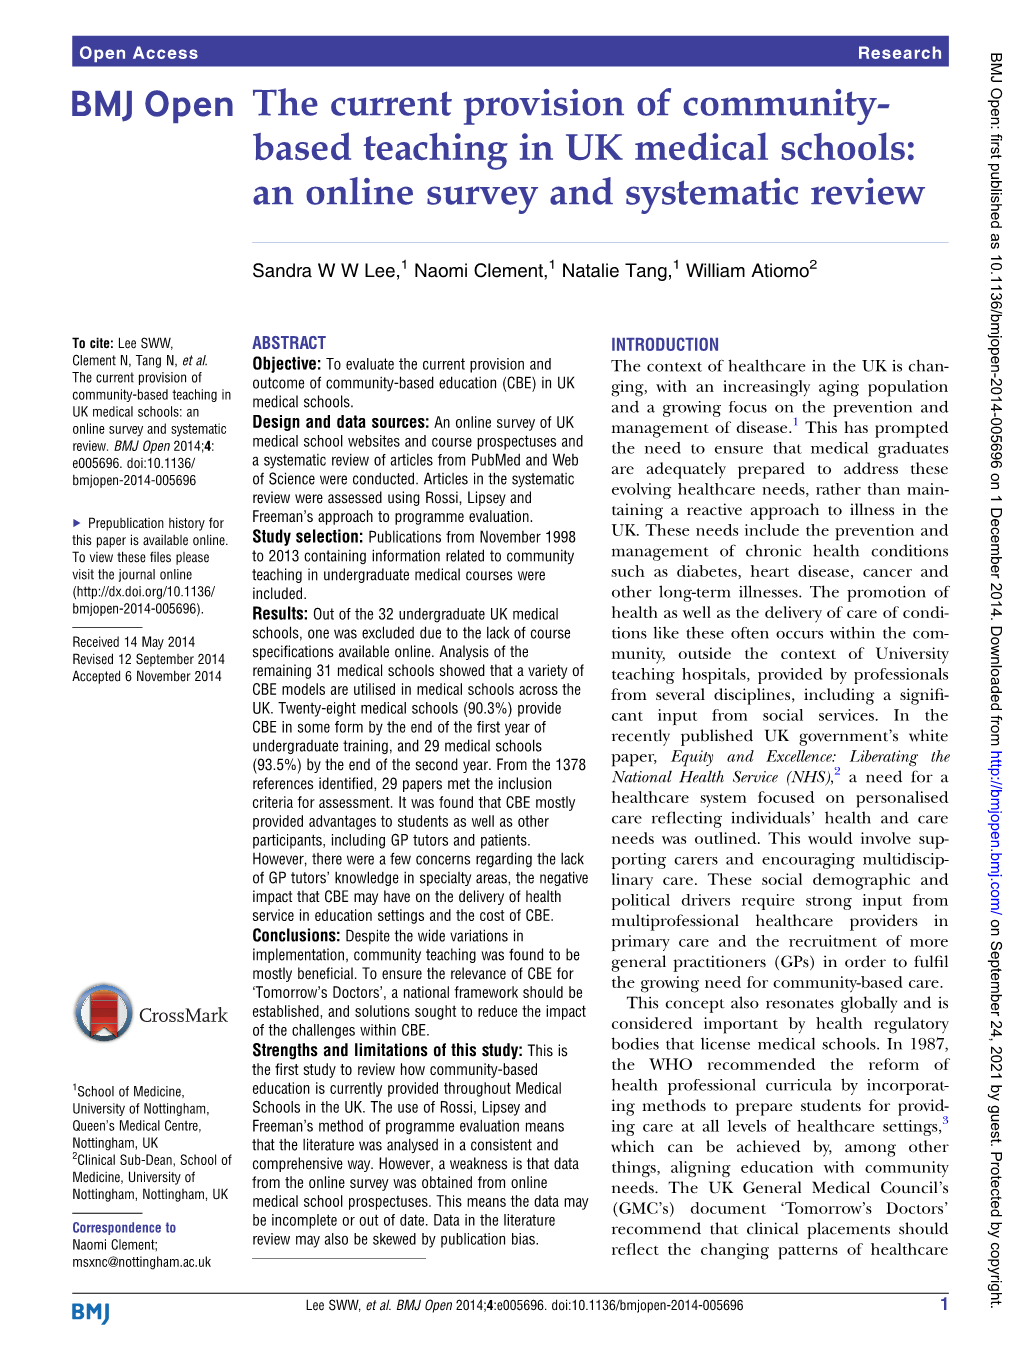 Based Teaching in UK Medical Schools: an Online Survey and Systematic Review